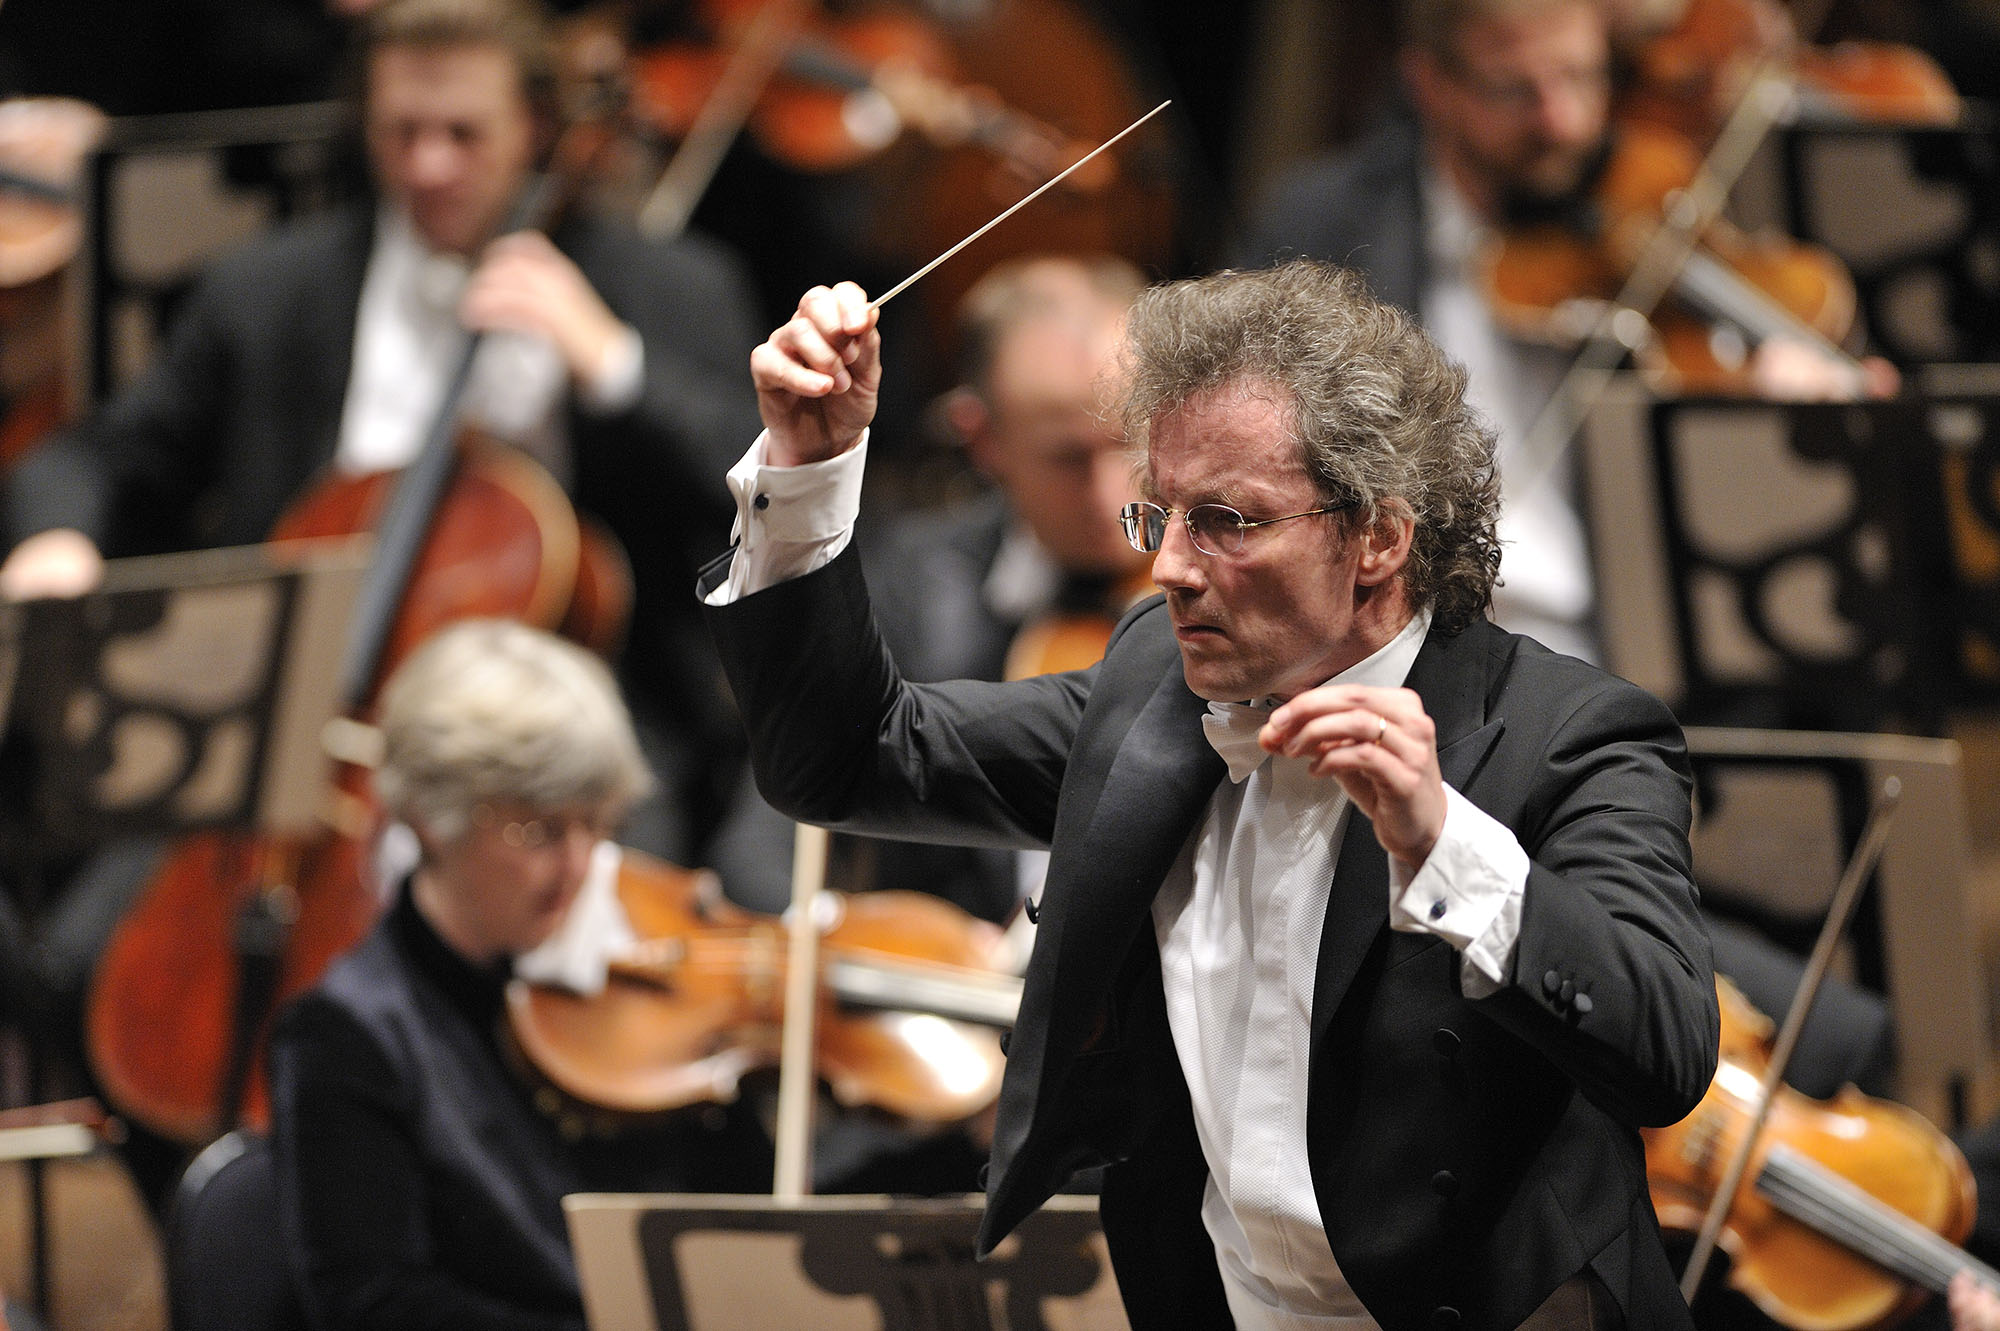 Franz is conducting the Orchestra with a serious expression on his face. 